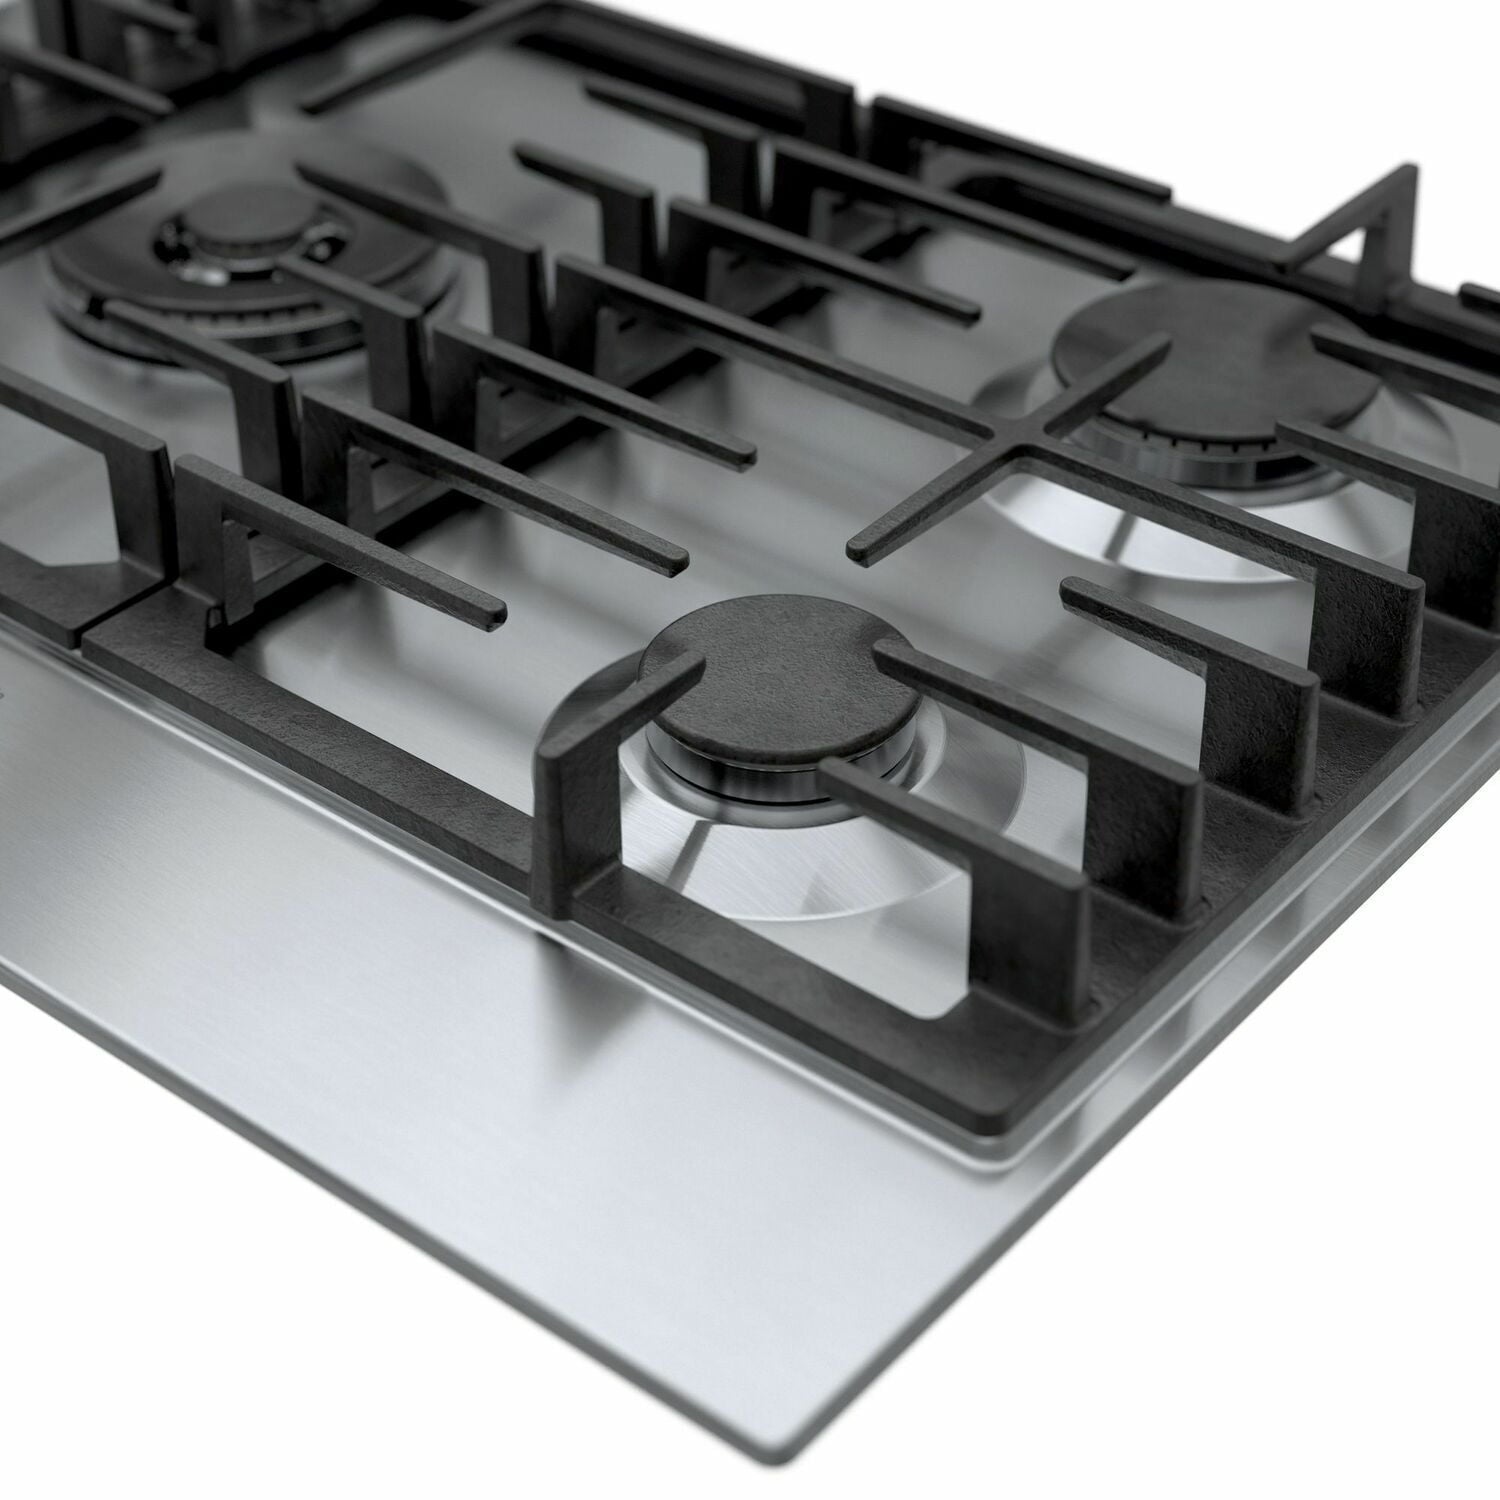 Bosch NGM8657UC 800 Series Gas Cooktop 36'' Stainless Steel Ngm8657Uc